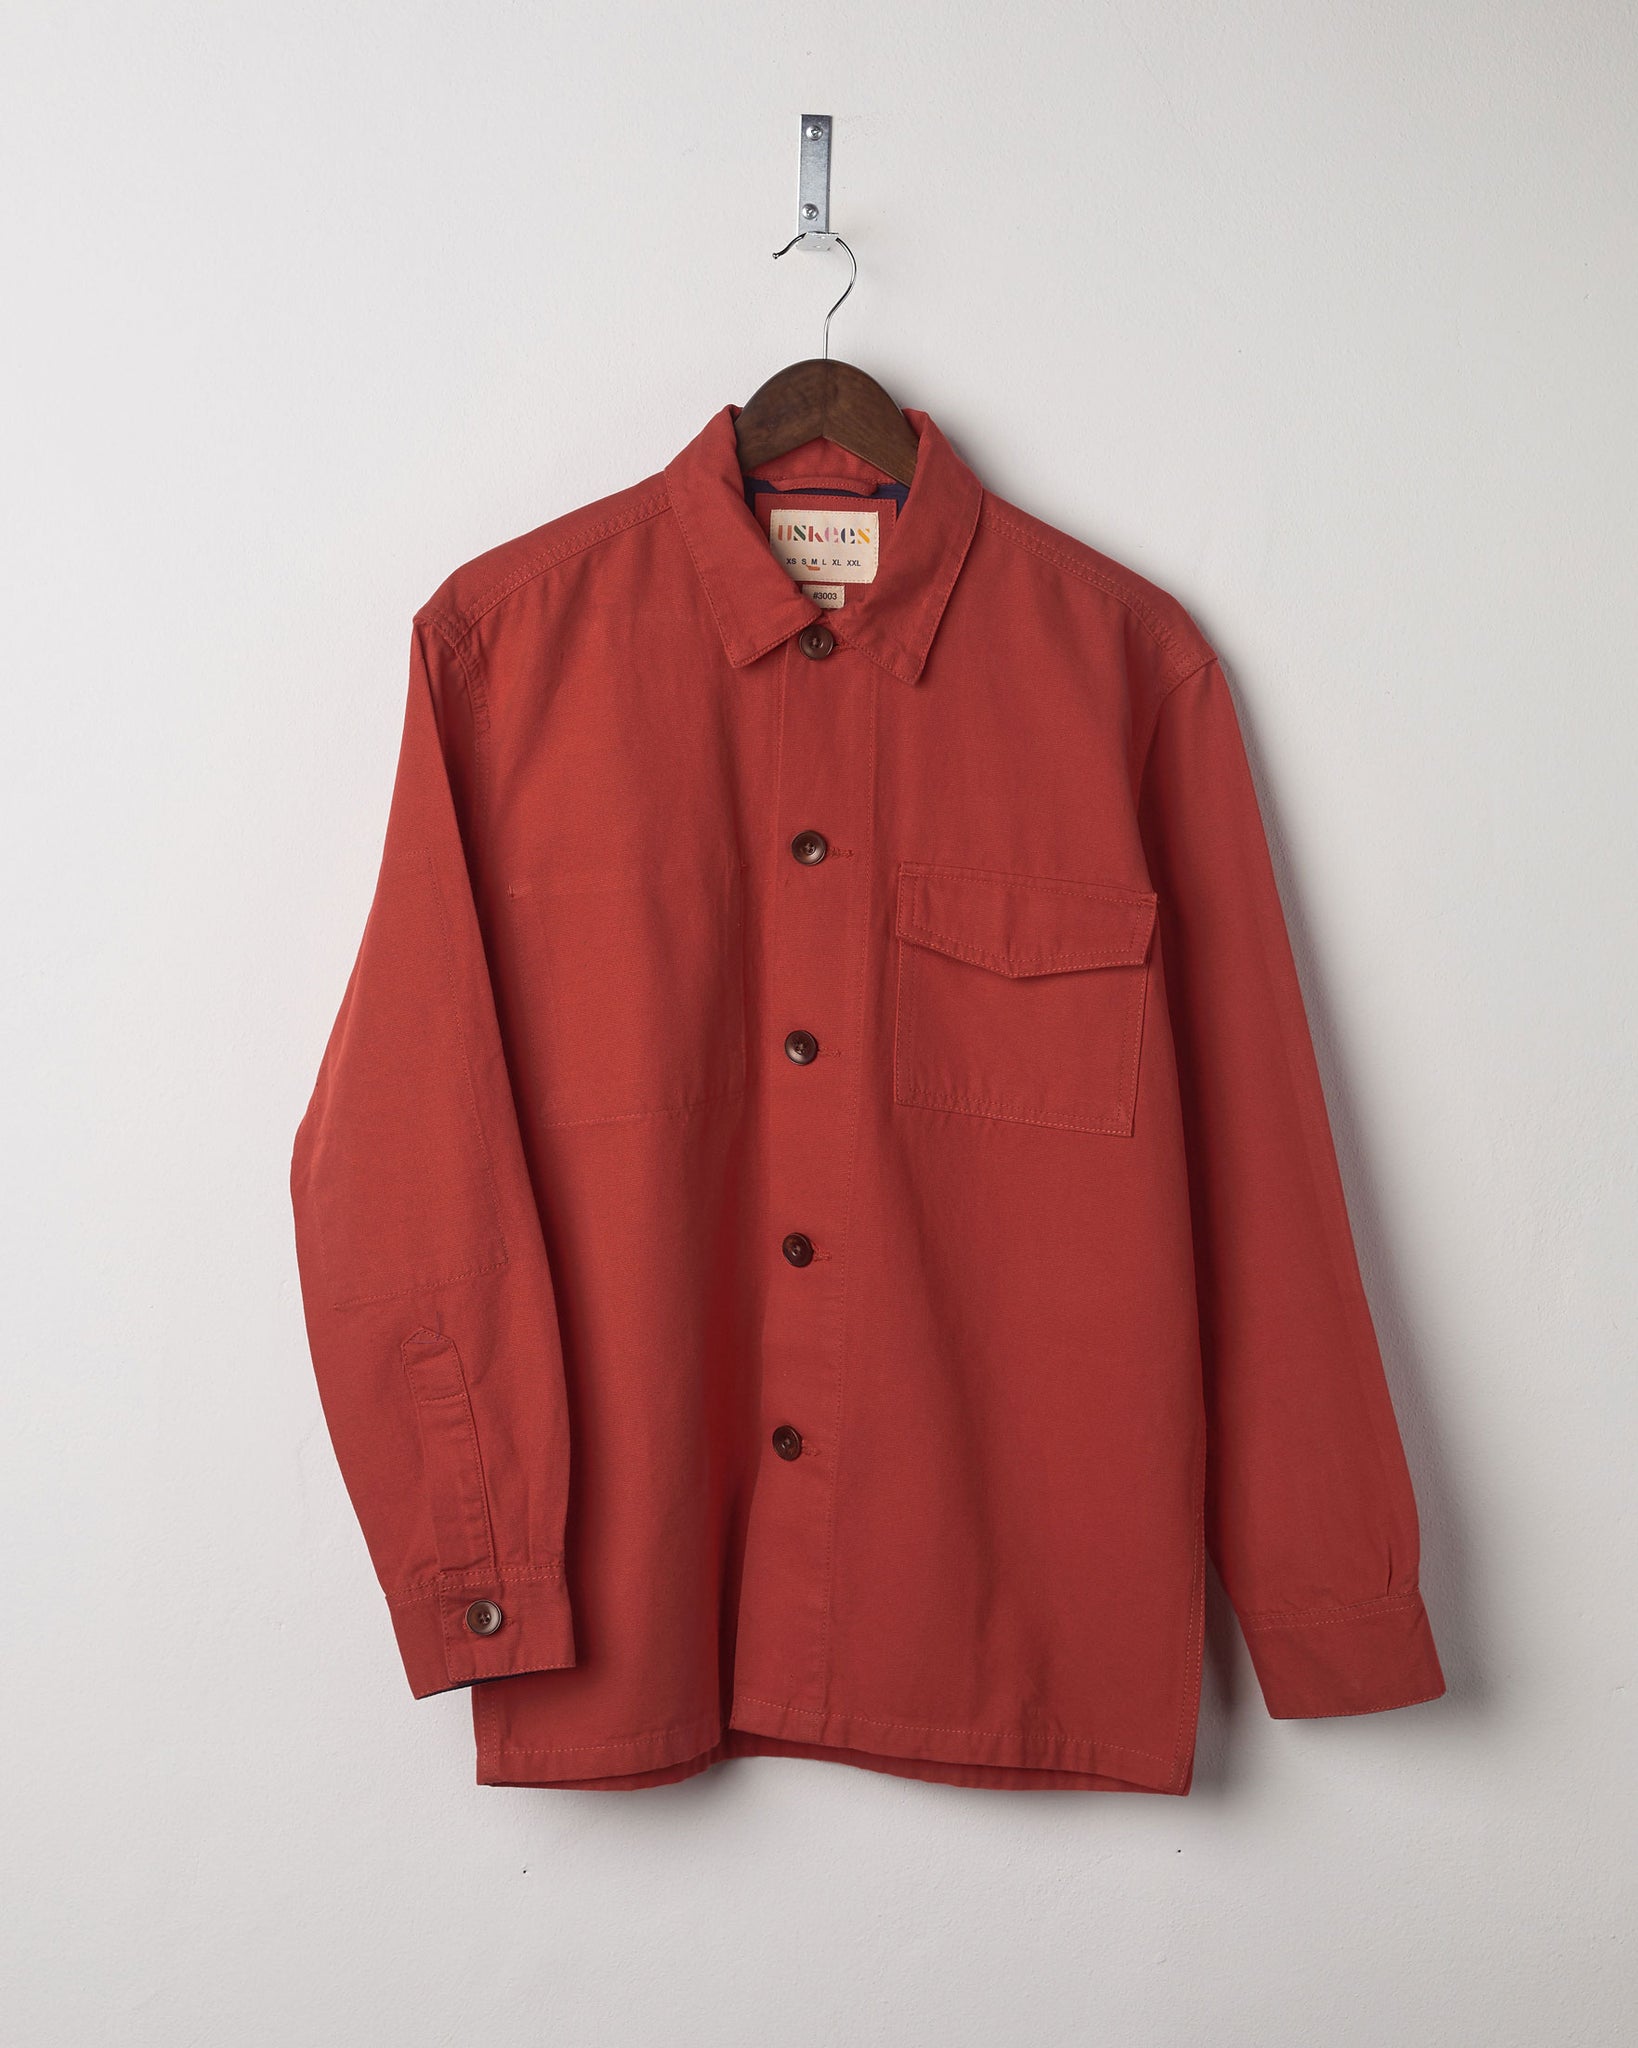 Front view of the terracotta-red buttoned 3003 workshirt from Uskees presented on hanger.